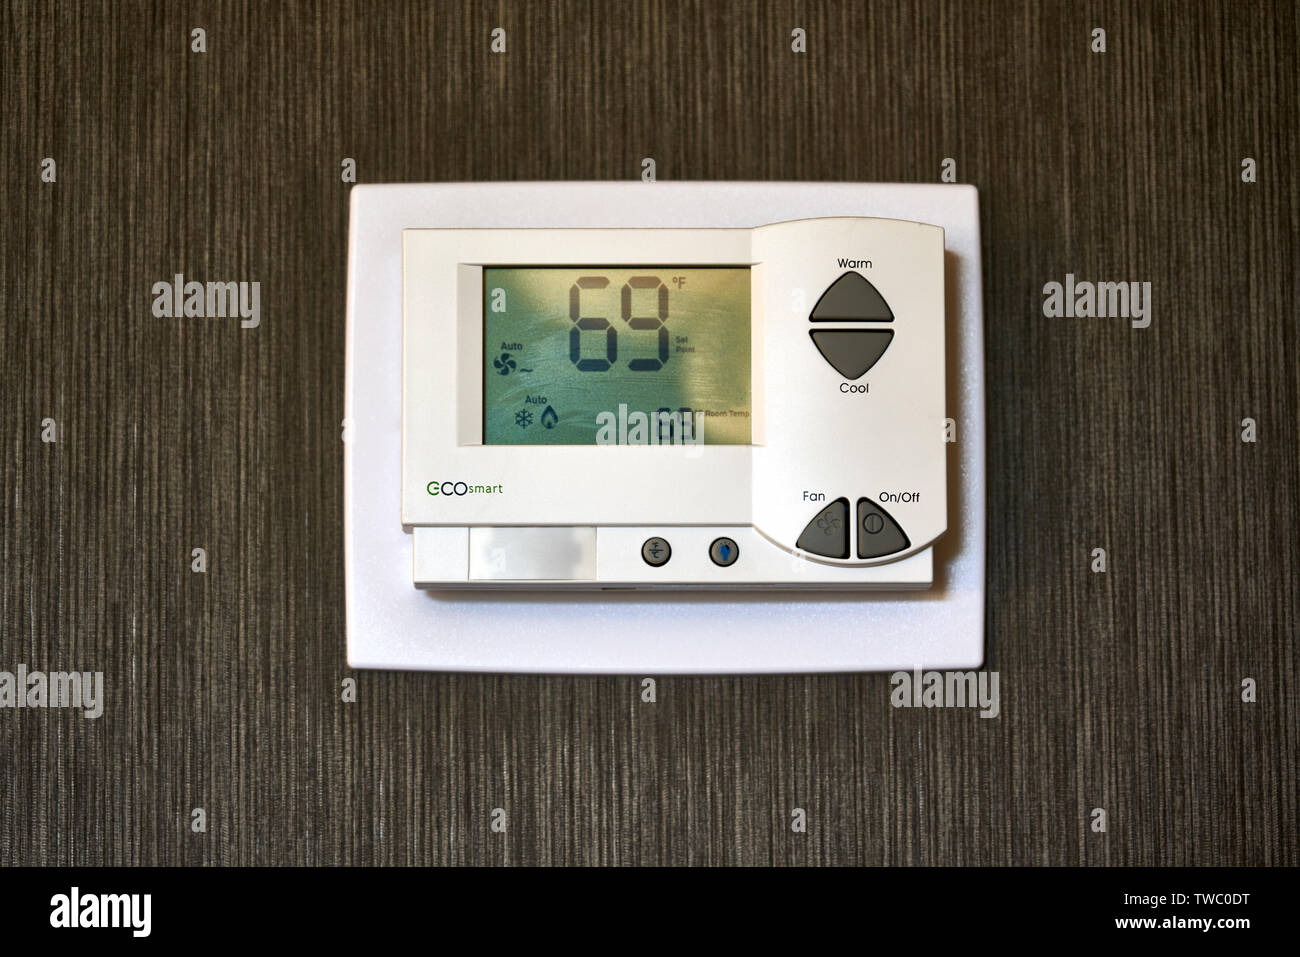 Tarrytown, NY - June 10, 2019: This Eco Smart hotel thermostat by Telkonet has an occupancy sensor for maximum efficiency. Stock Photo